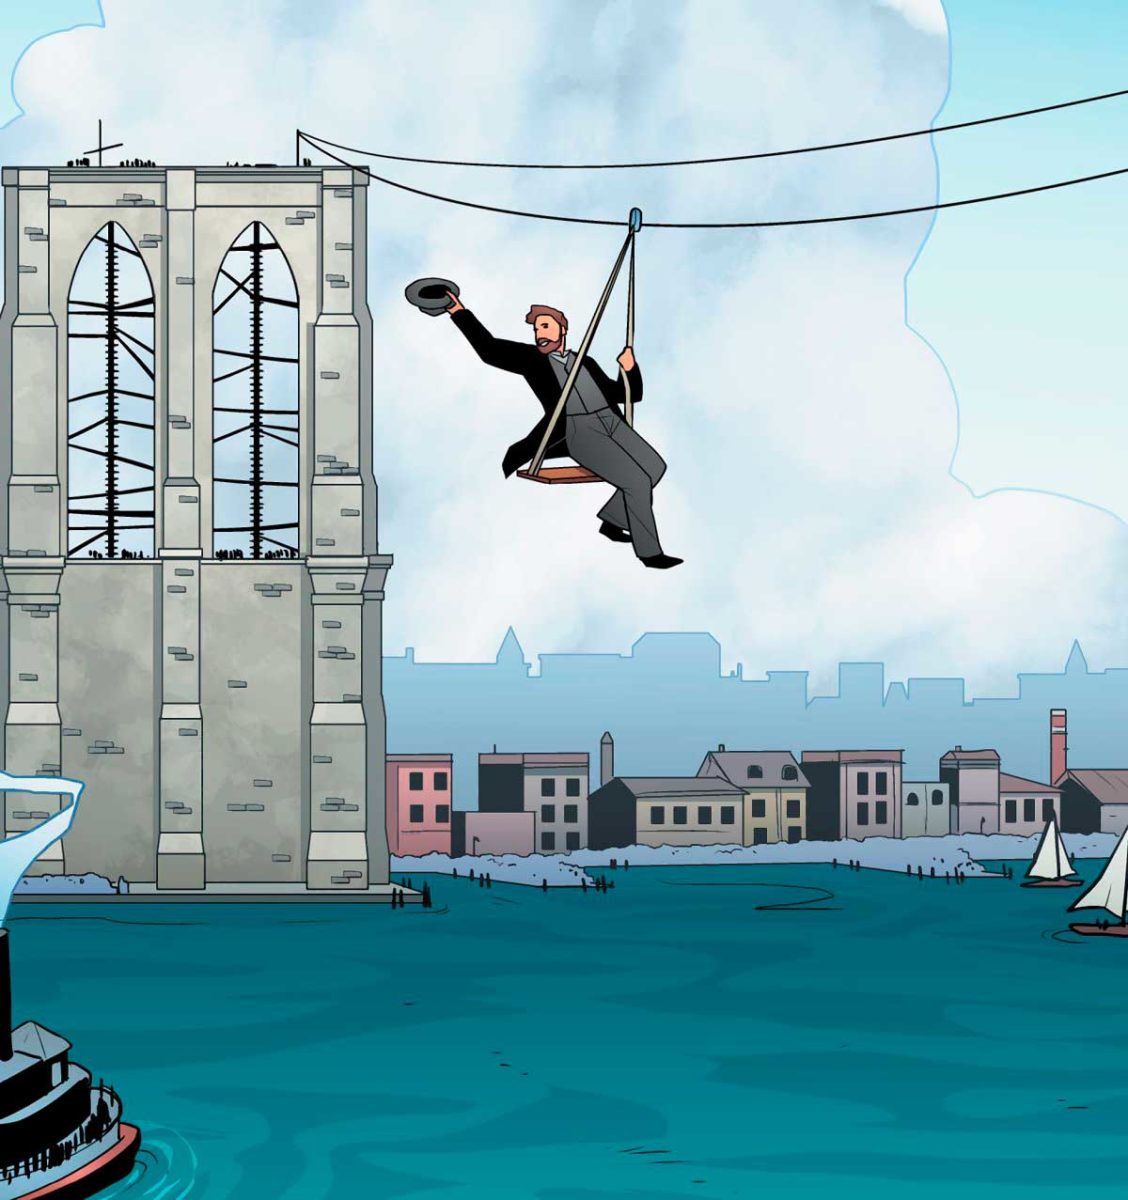 Sketching up: Graphic novel shows how the Brooklyn Bridge was built